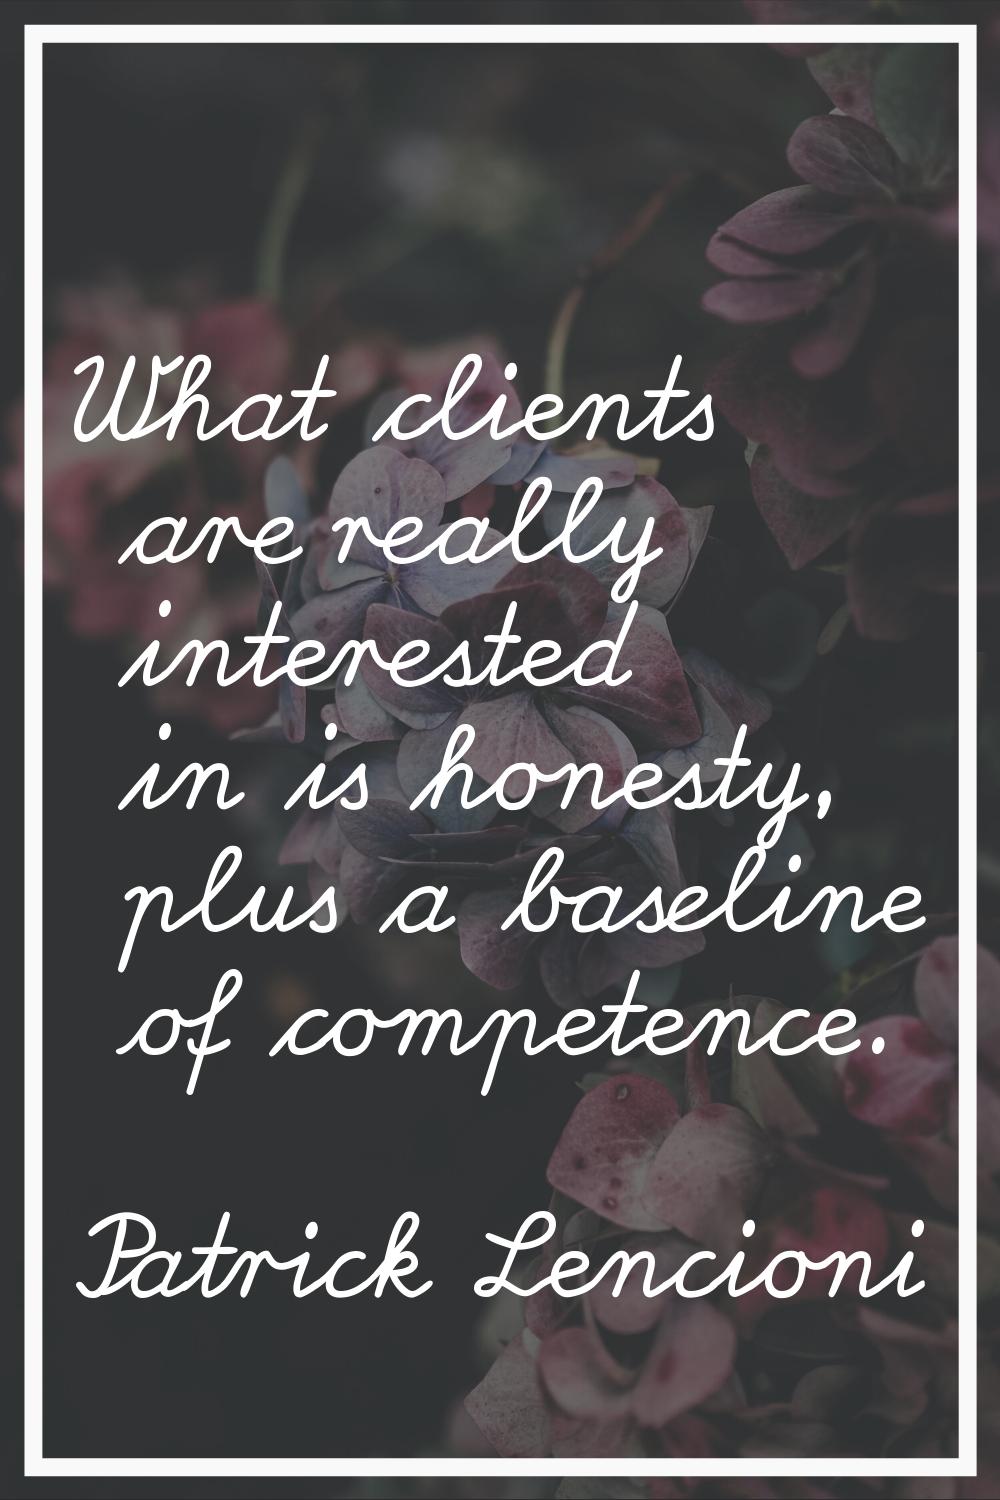 What clients are really interested in is honesty, plus a baseline of competence.